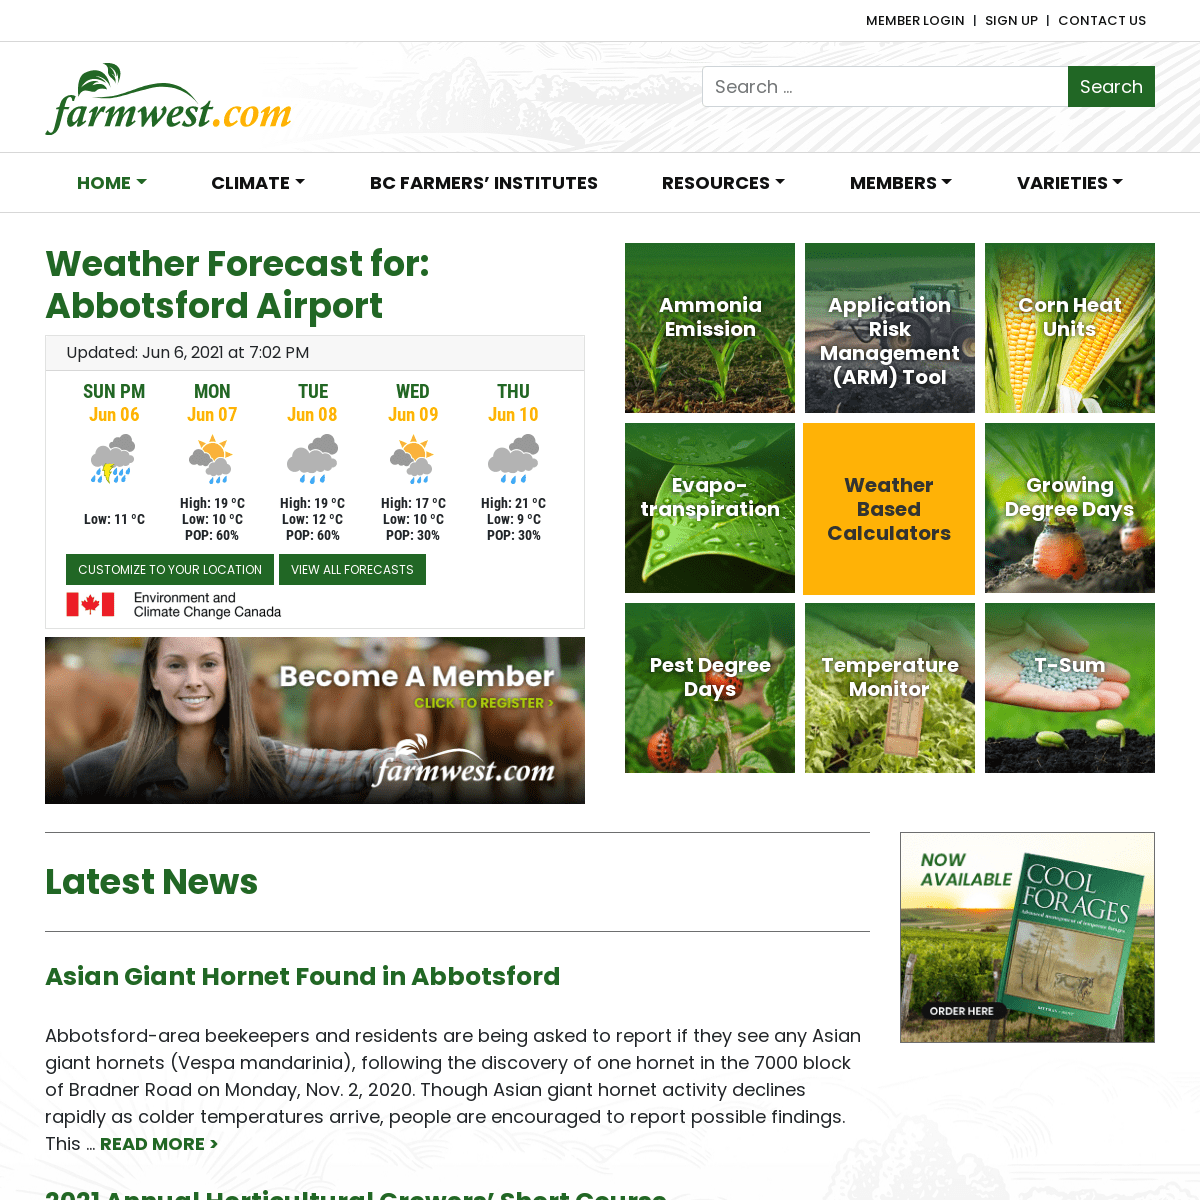 A complete backup of https://farmwest.com